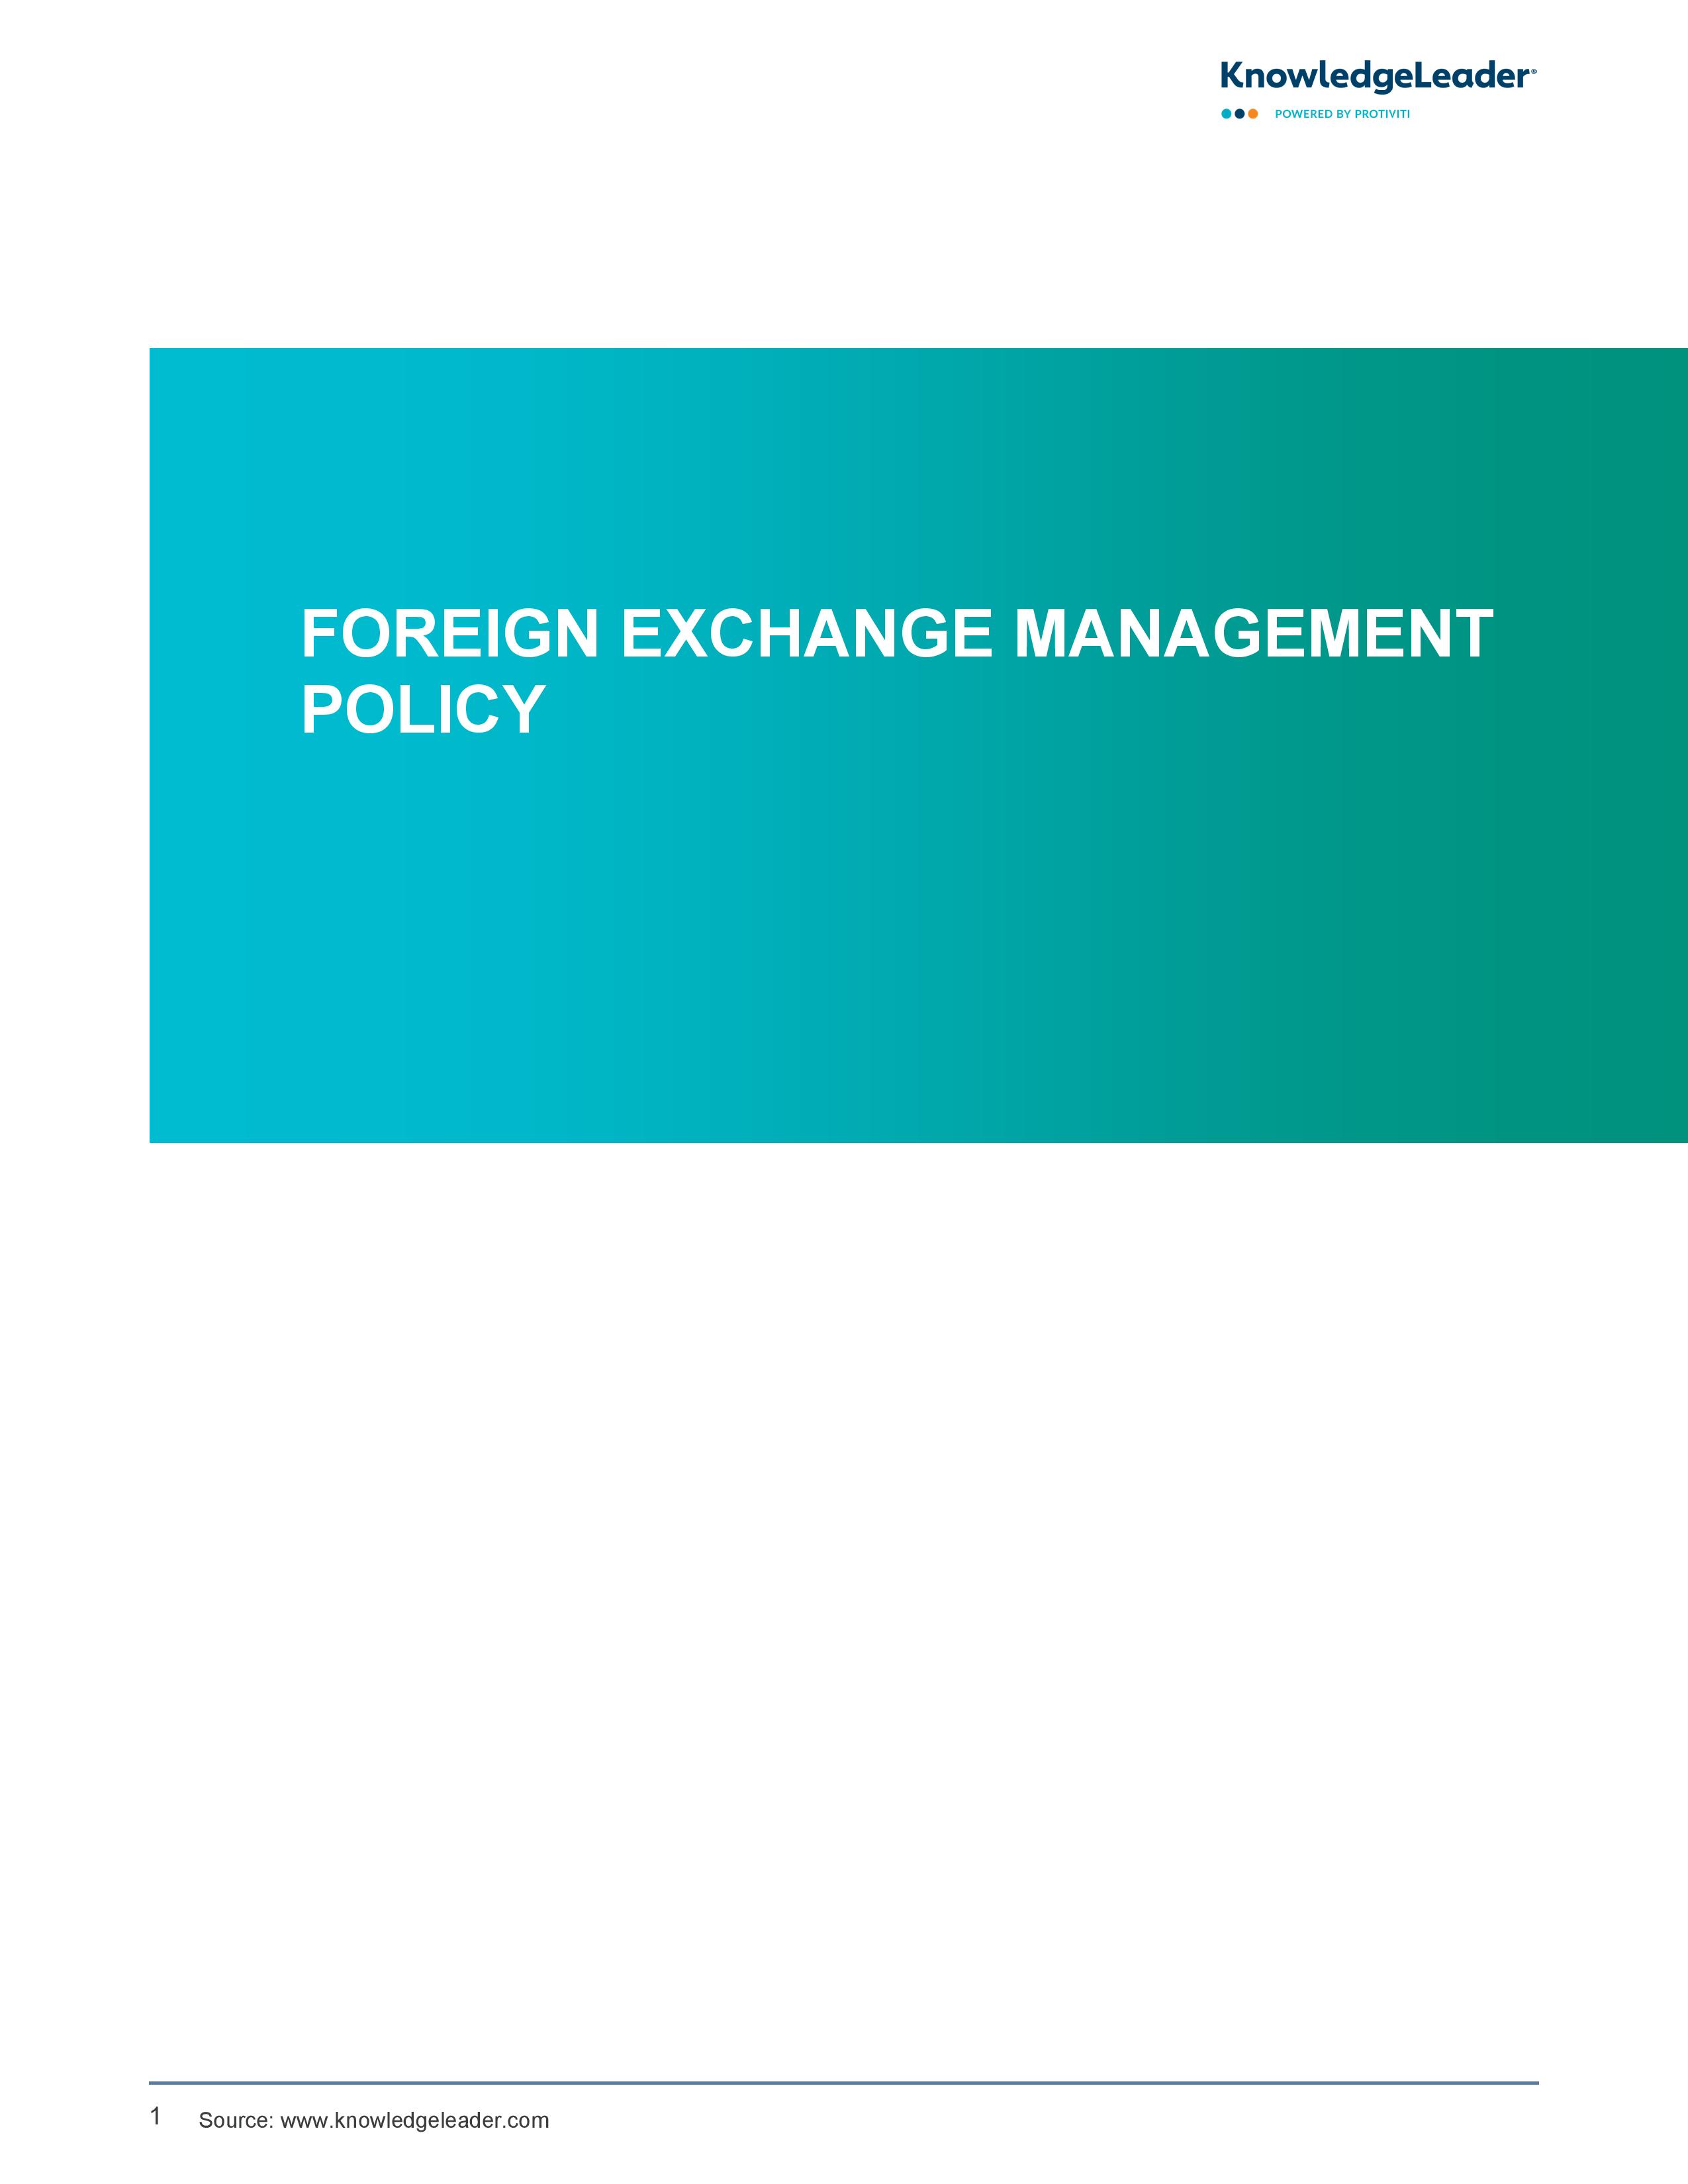 Screenshot of the first page of Foreign Exchange Management Policy